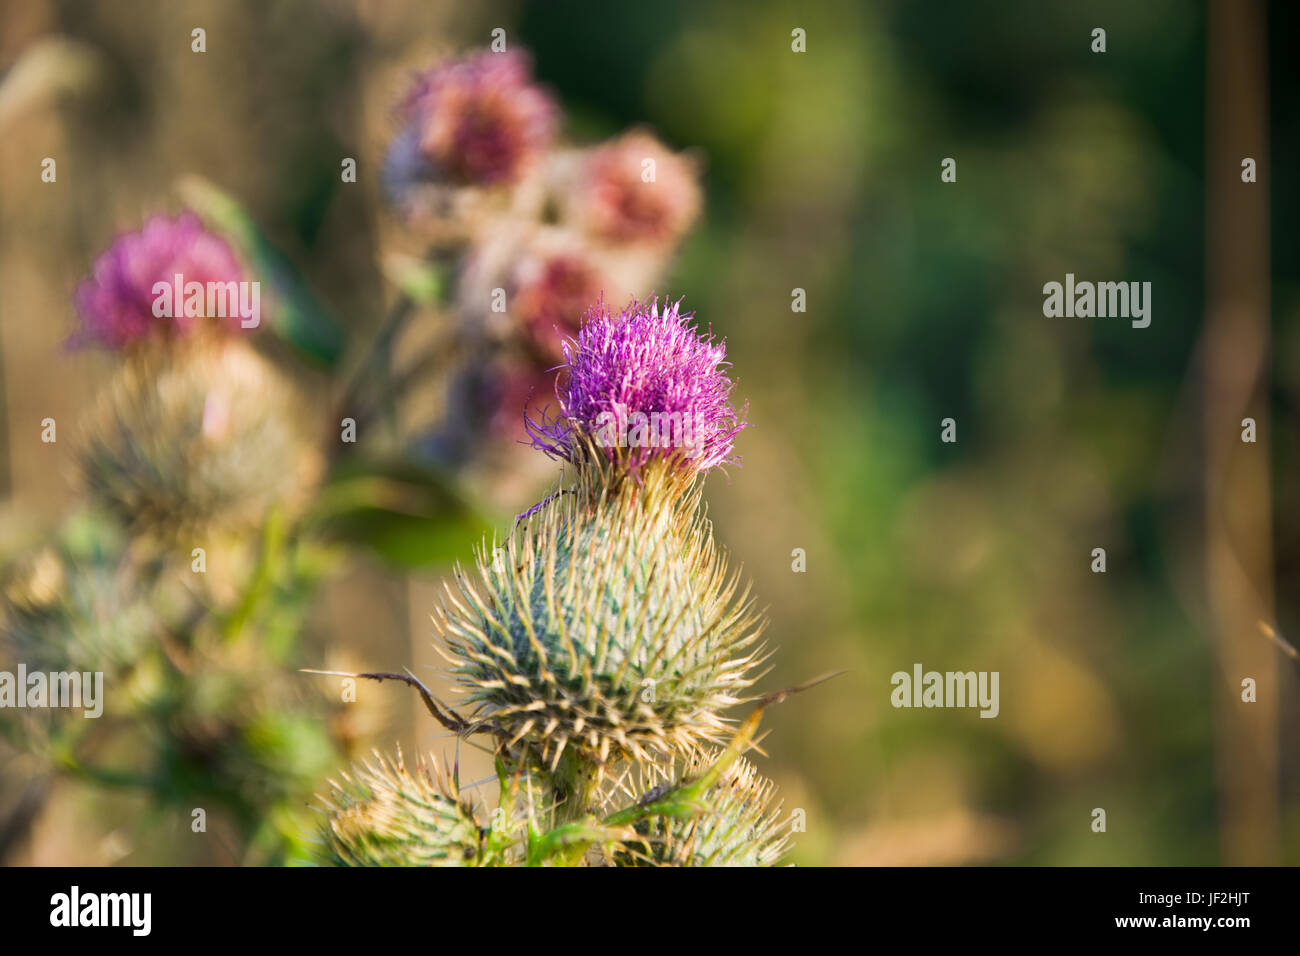 Flowering plants thistle weed Stock Photo